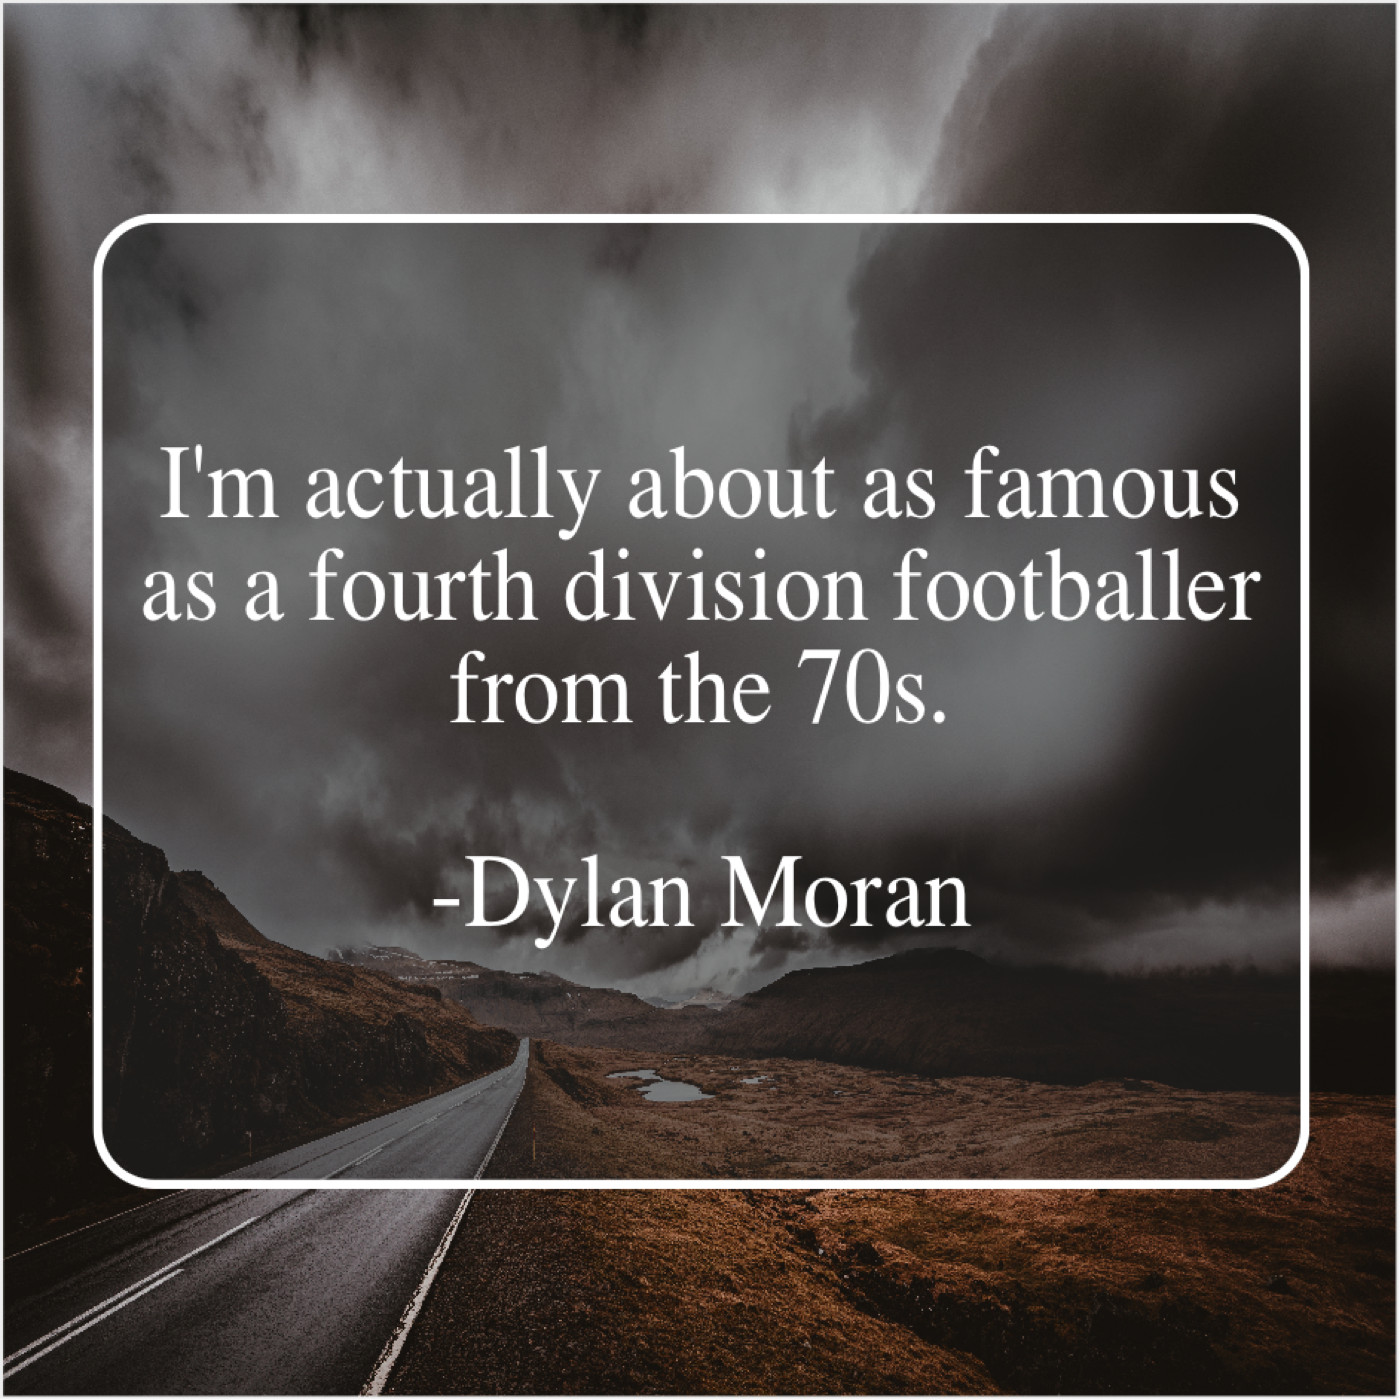 Dylan Moran – I’m actually about as famous… – Famous Quotes That